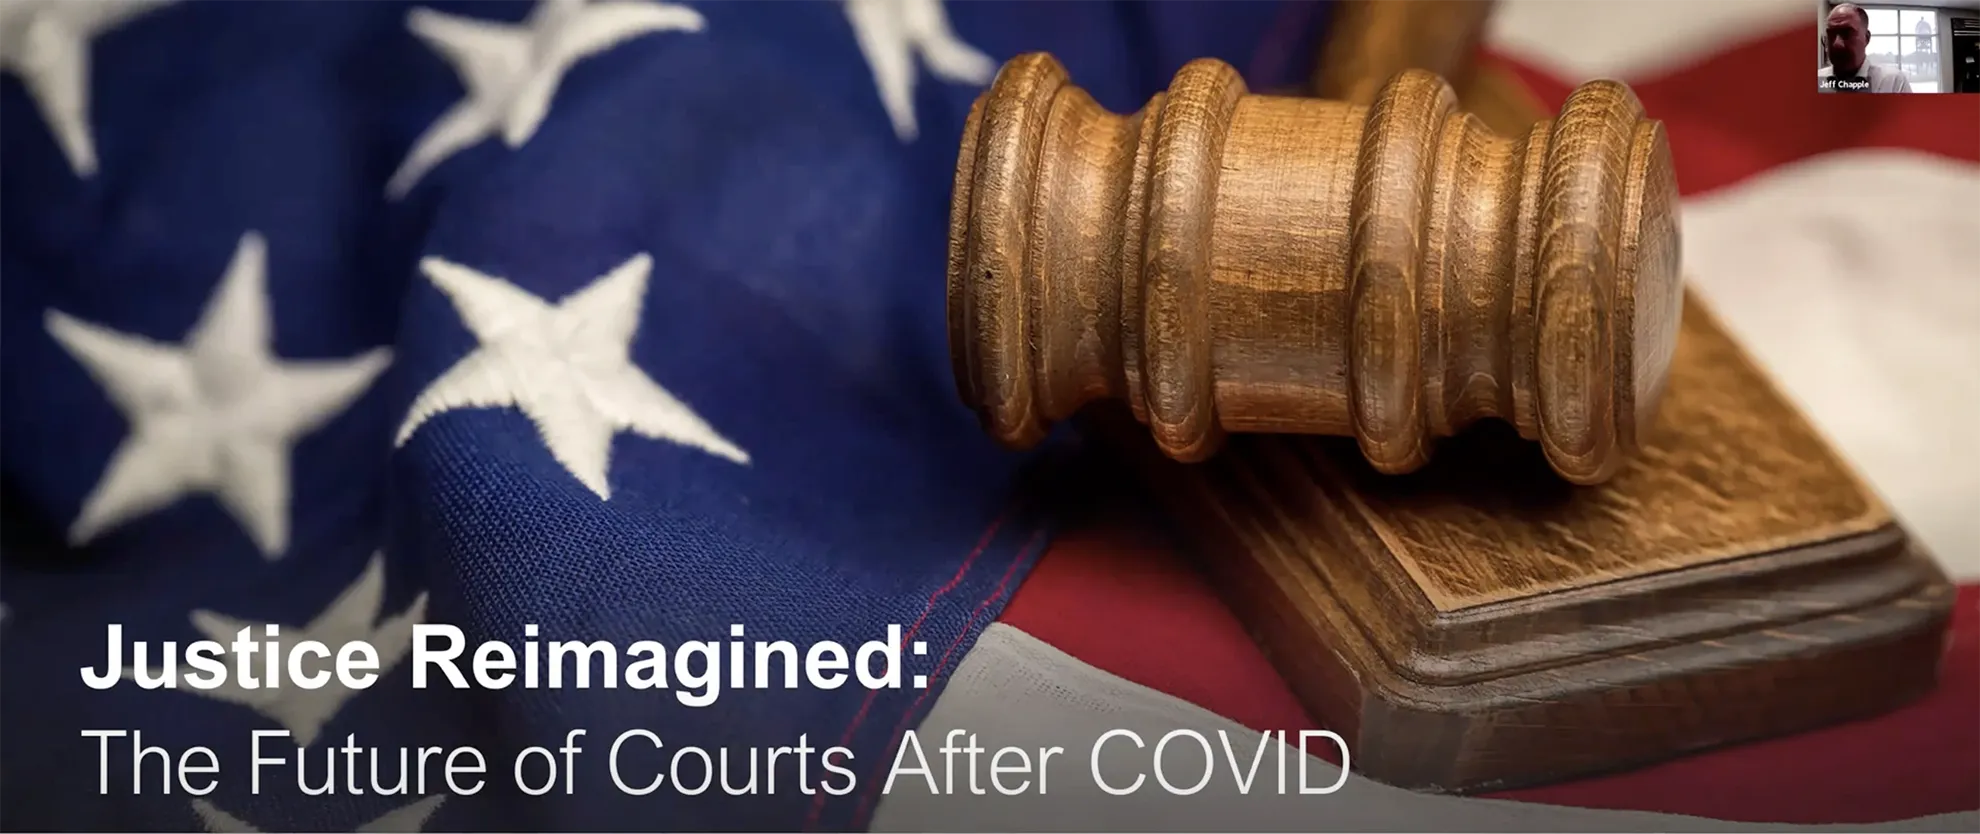 Justice Reimagined - The Future of Courts After Covid